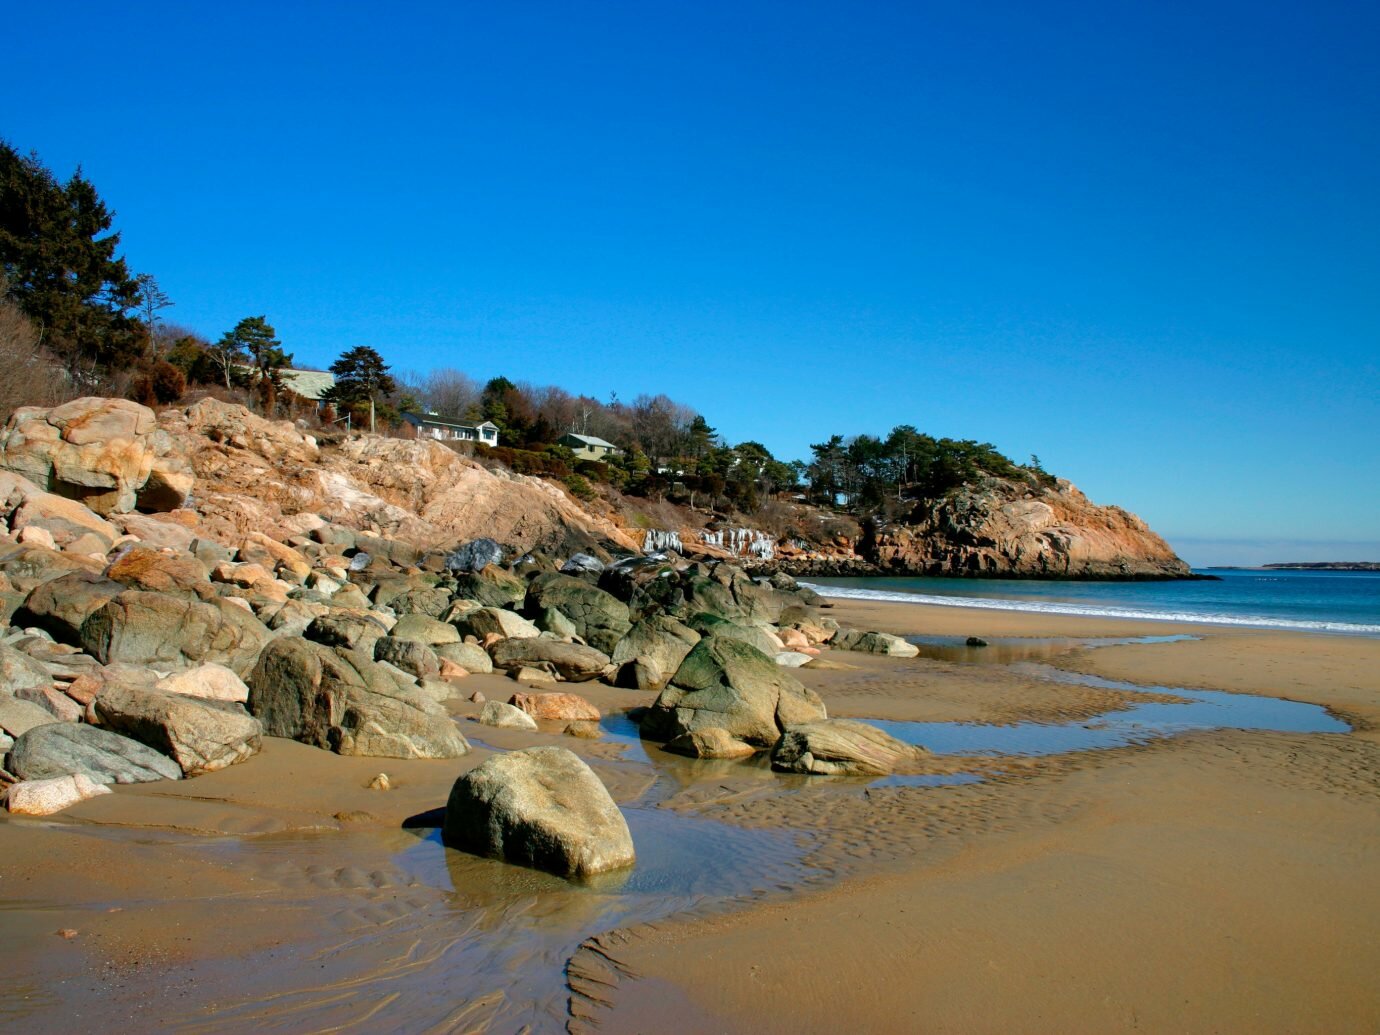 MARCH | Singing Beach Named Tenth Most Beautiful Beach In US On February 27, 2020 Jetsetter Magazine released its list of the 11 best beaches in the U.S., which included Singing Beach in the tenth-place spot.  The national magazine noted Manchester’s “sleepy harbor, shingled houses, and charming main street” along with Singing Beach’s unique ability to squeak under your feet.  Other beaches on the list also included Ditch Plains Beach (No. 1) in New York, Baker Beach (No. 2) in San Francisco, Waipio Valley Beach (No. 3) on Big Island Hawaii, as well as Goose Rocks Beach (No. 8), which is only an hour and a half away in Maine.  